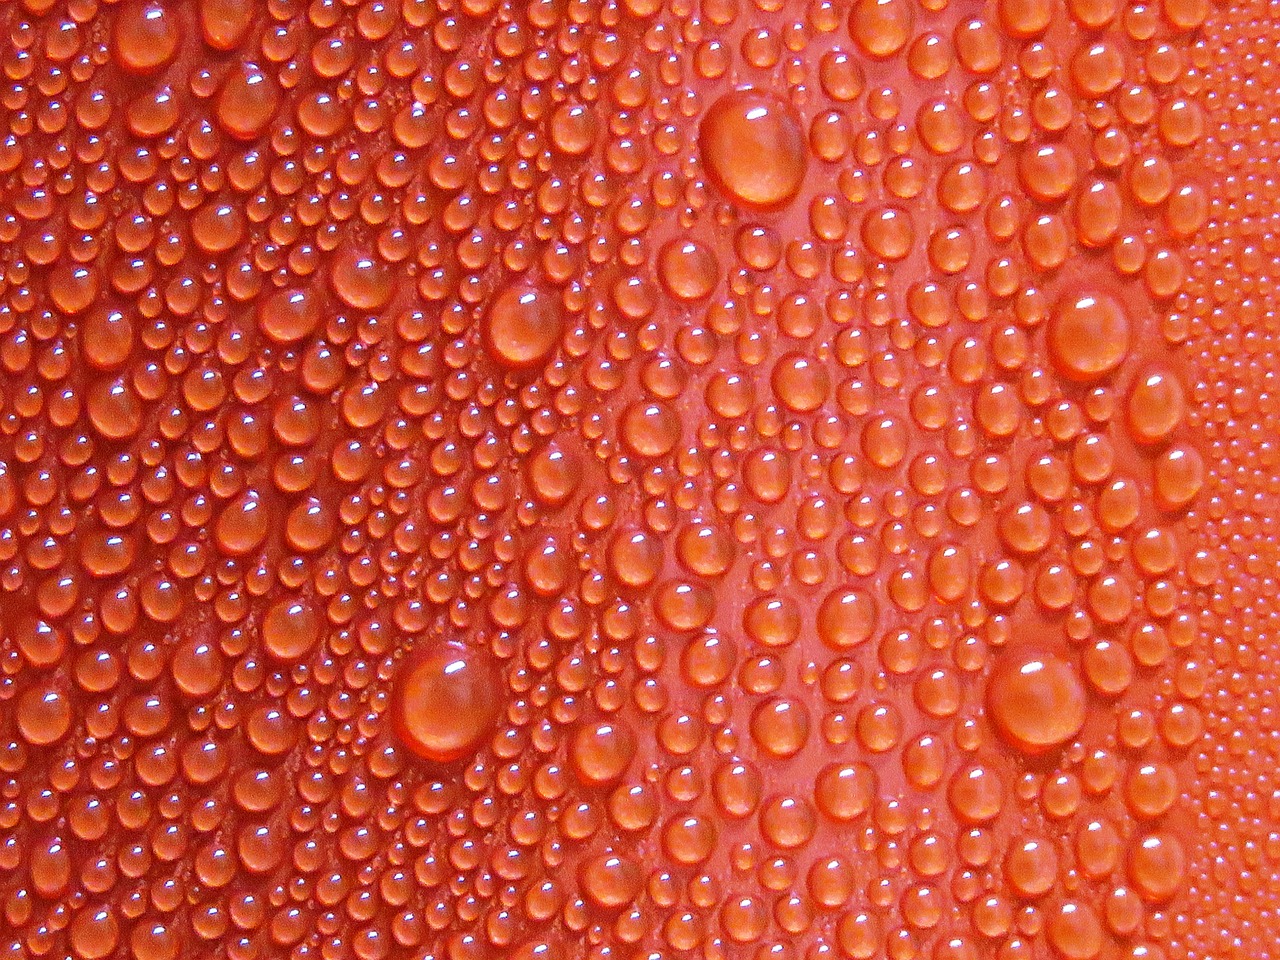 sweating water bubbles water bubbles on cool drinks free photo